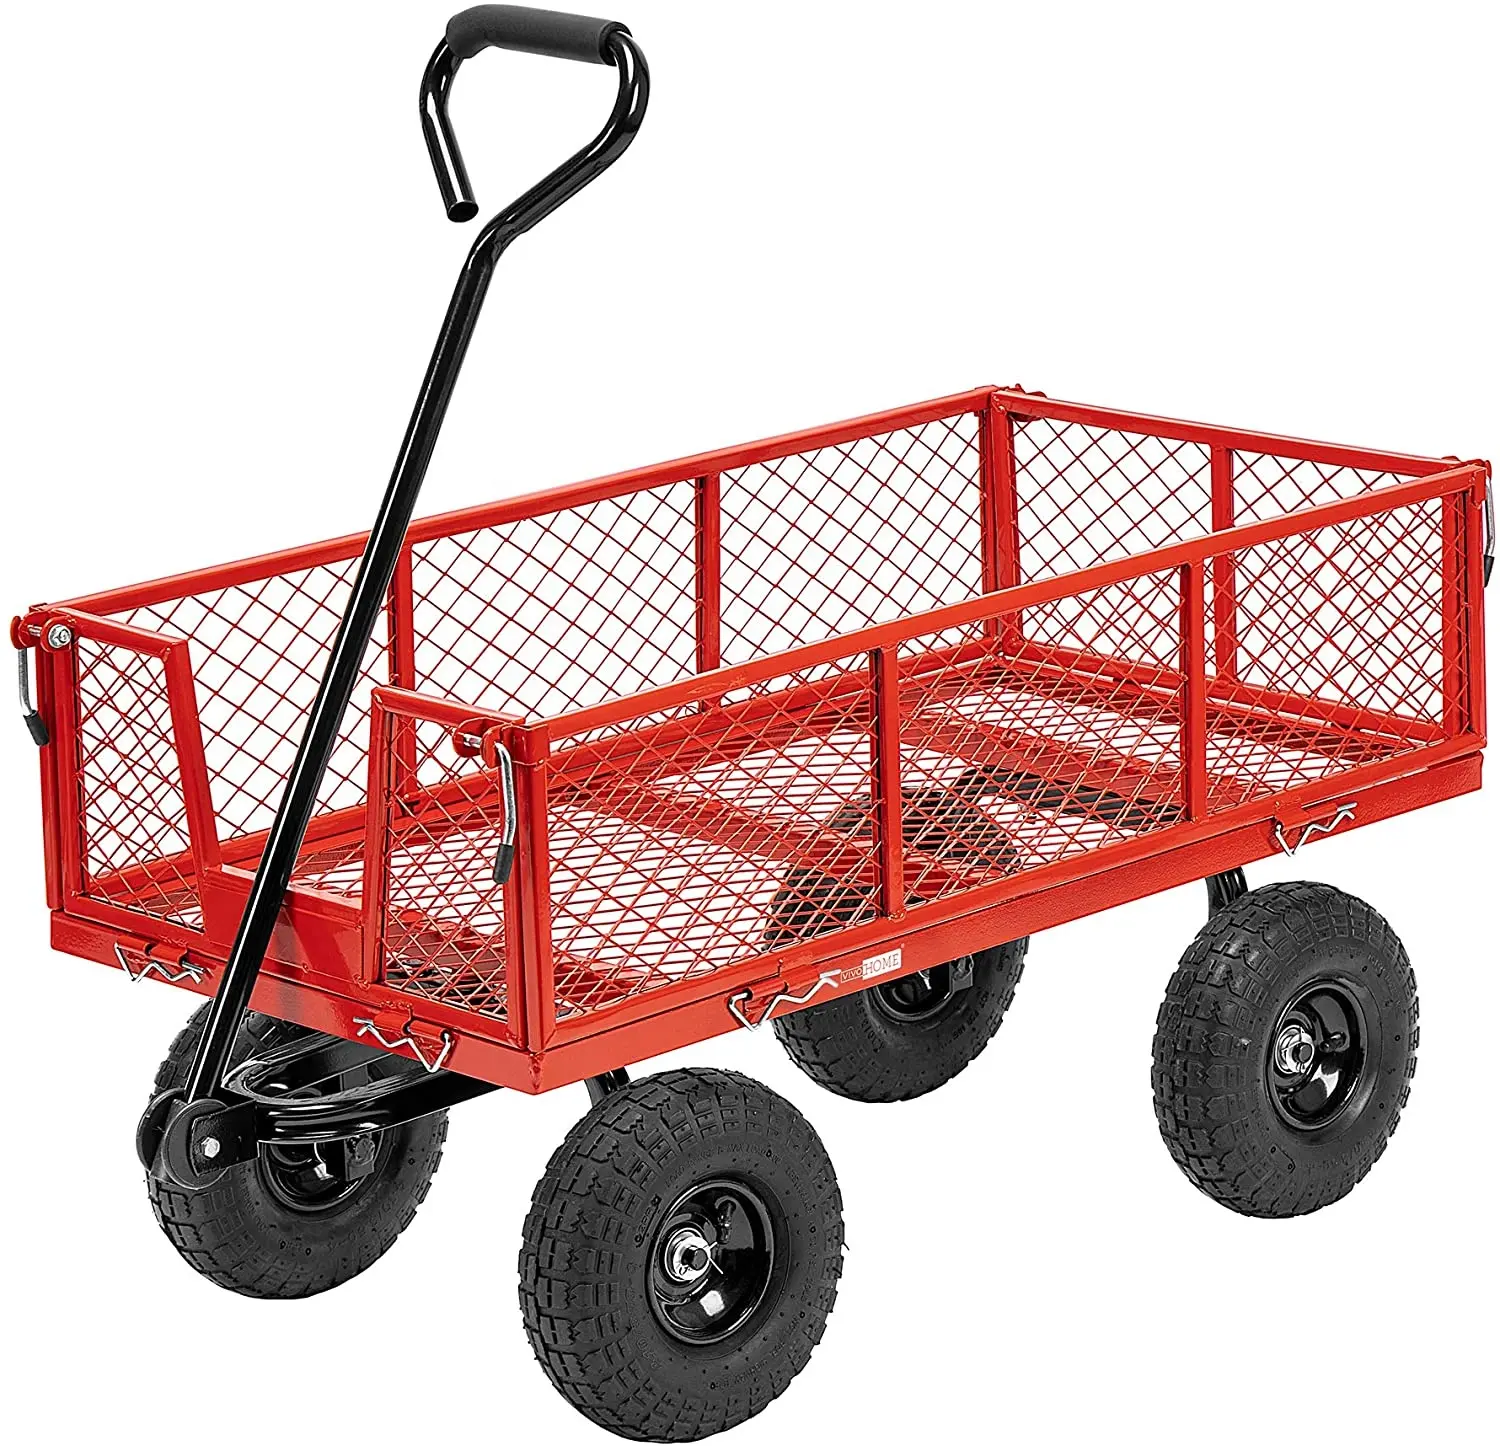 Heavy Duty 1100 Lbs Capacity Folding Steel Utility Wagon Mesh Garden Cart with Removable Sides and 10 Inch Wheels